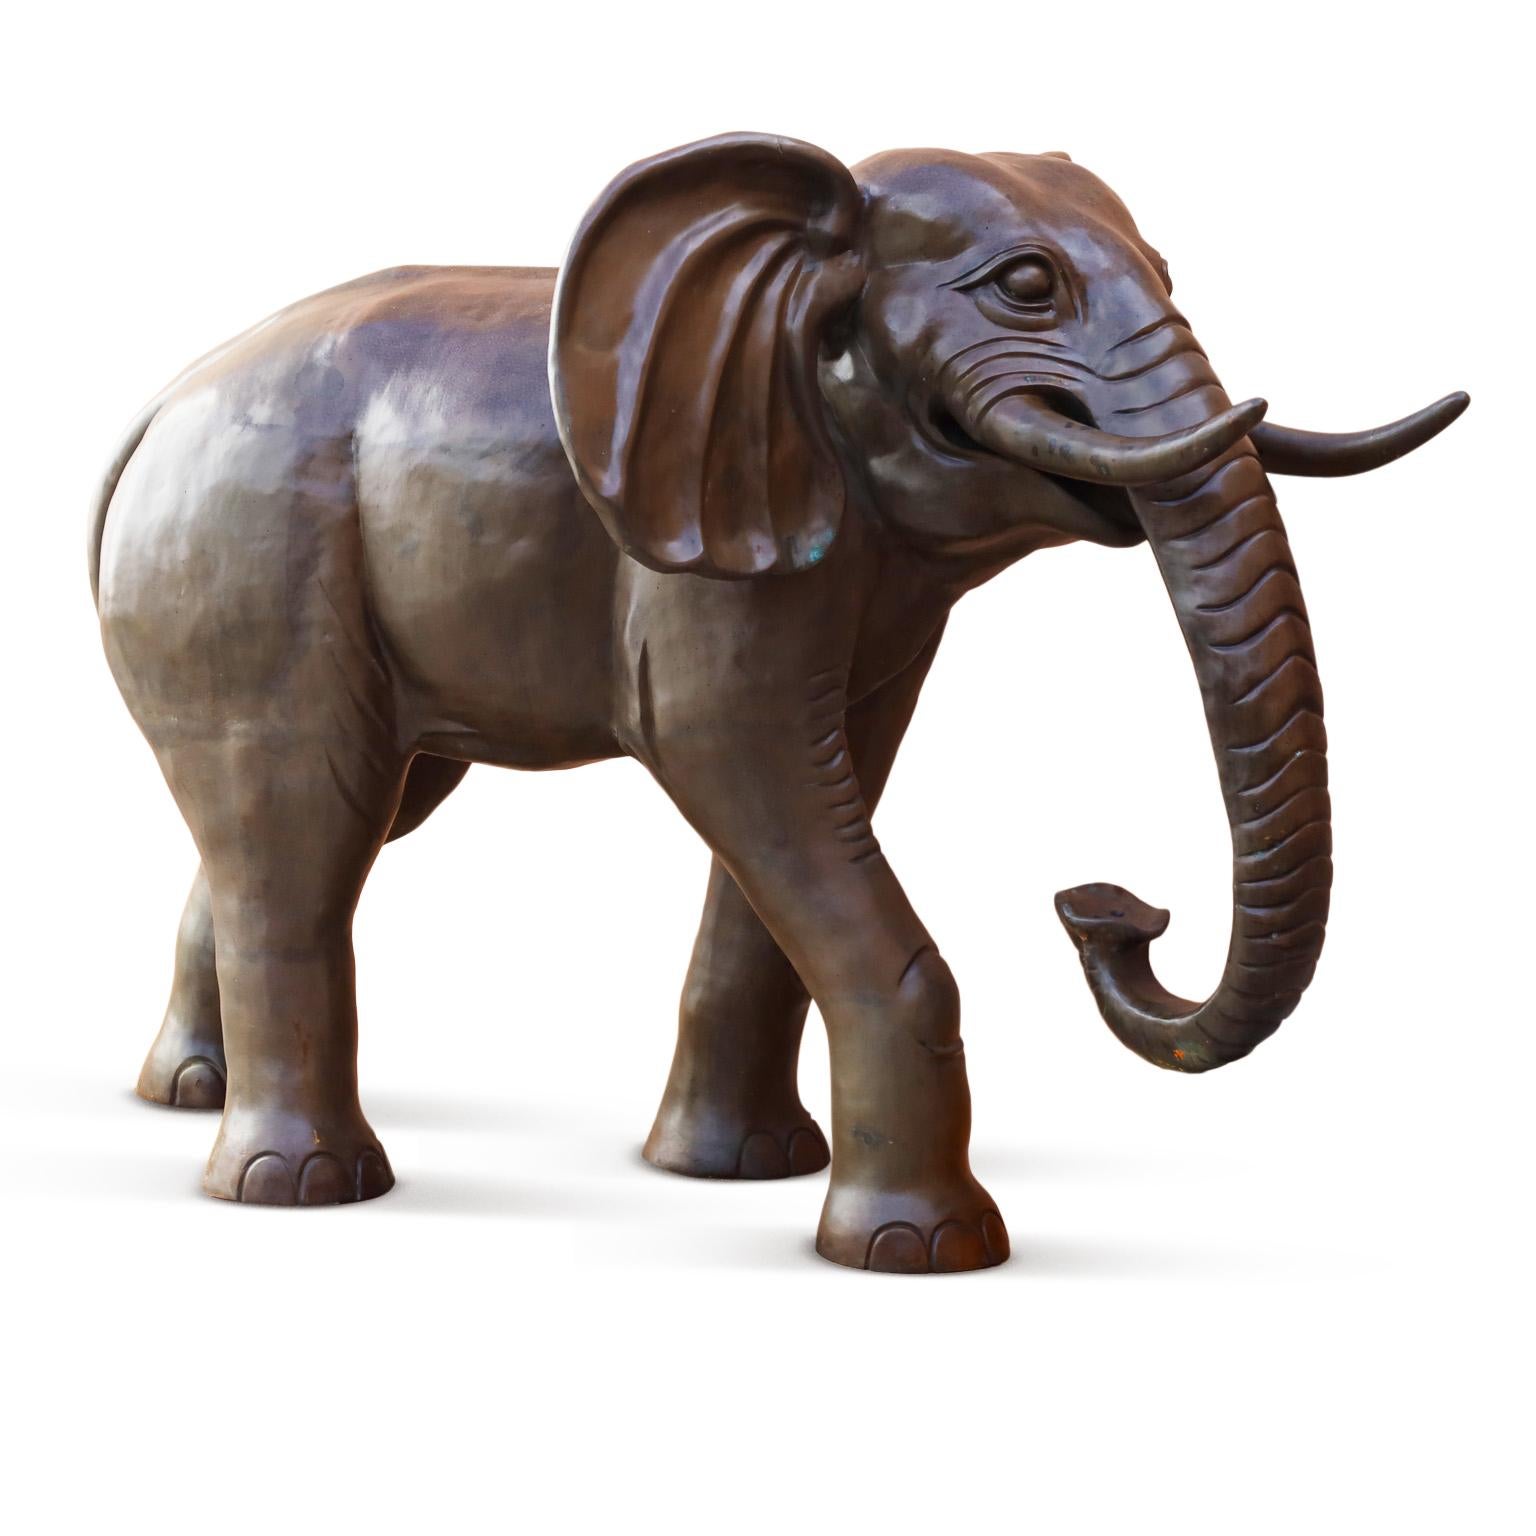 Rare and remarkable elephant sculpture expertly crafted in bronze with a lush patina, ambitious attention to detail, and a dramatic near life size scale.